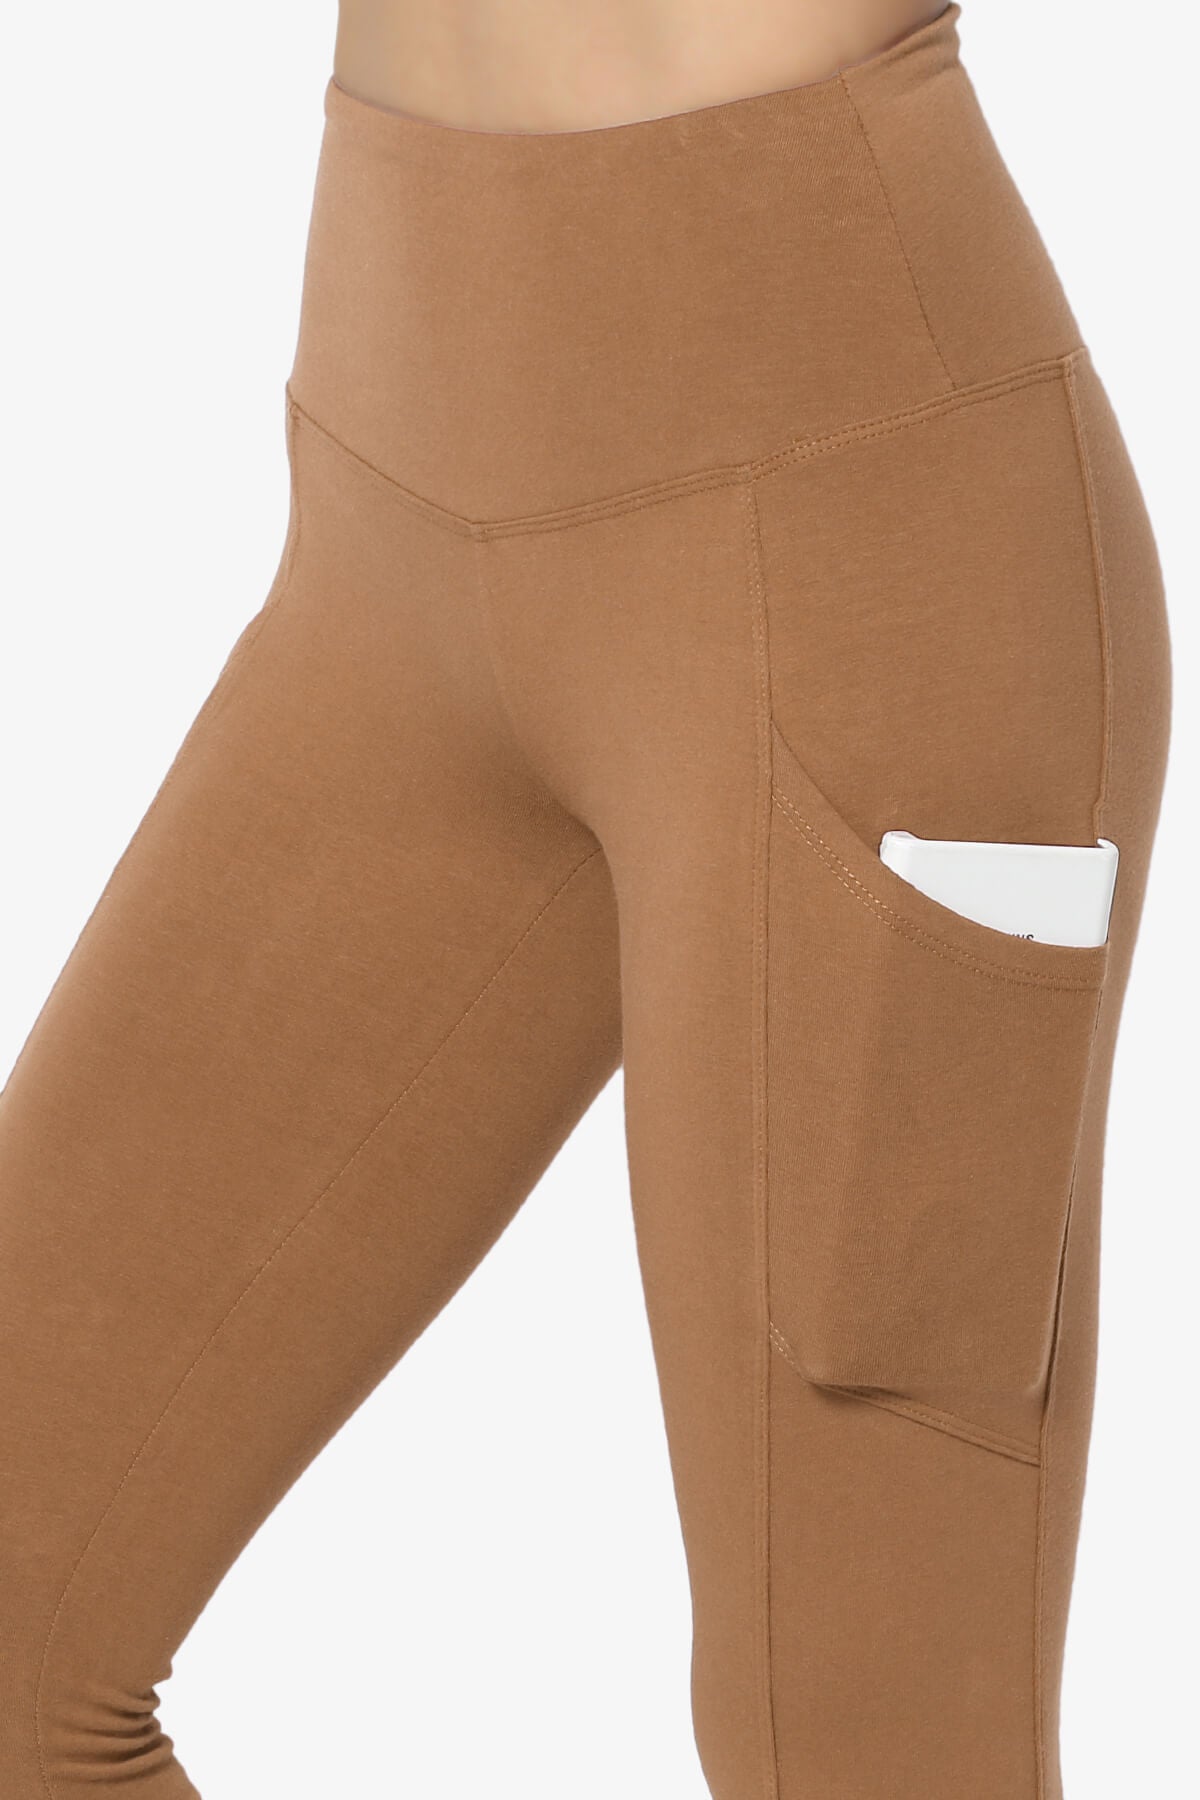 Load image into Gallery viewer, Ansley Luxe Cotton Leggings with Pockets DEEP CAMEL_5
